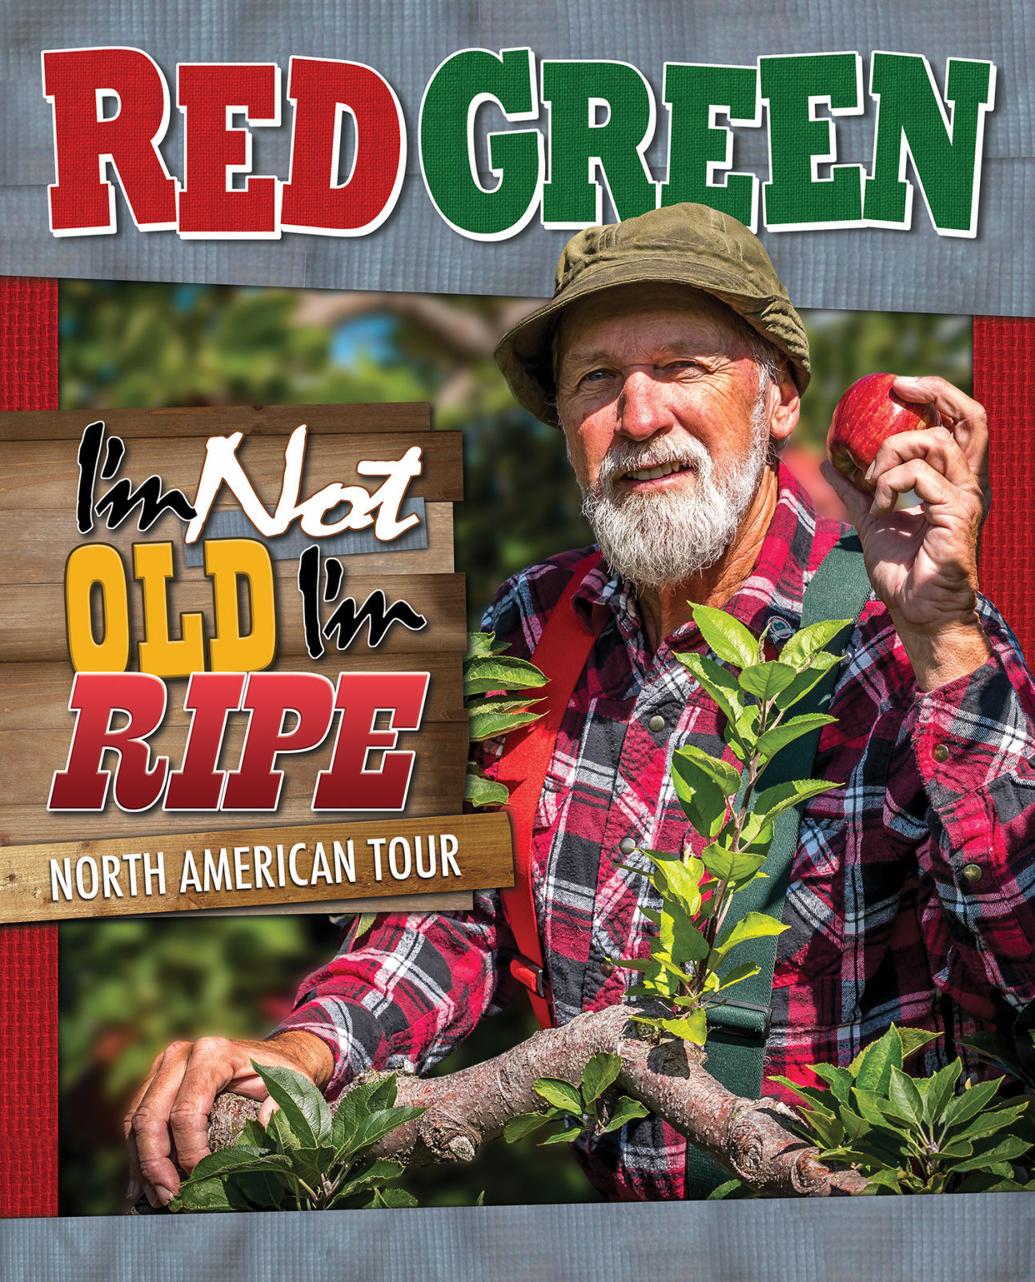 Canadian comedy icon Steve Smith to bring Red Green character to the